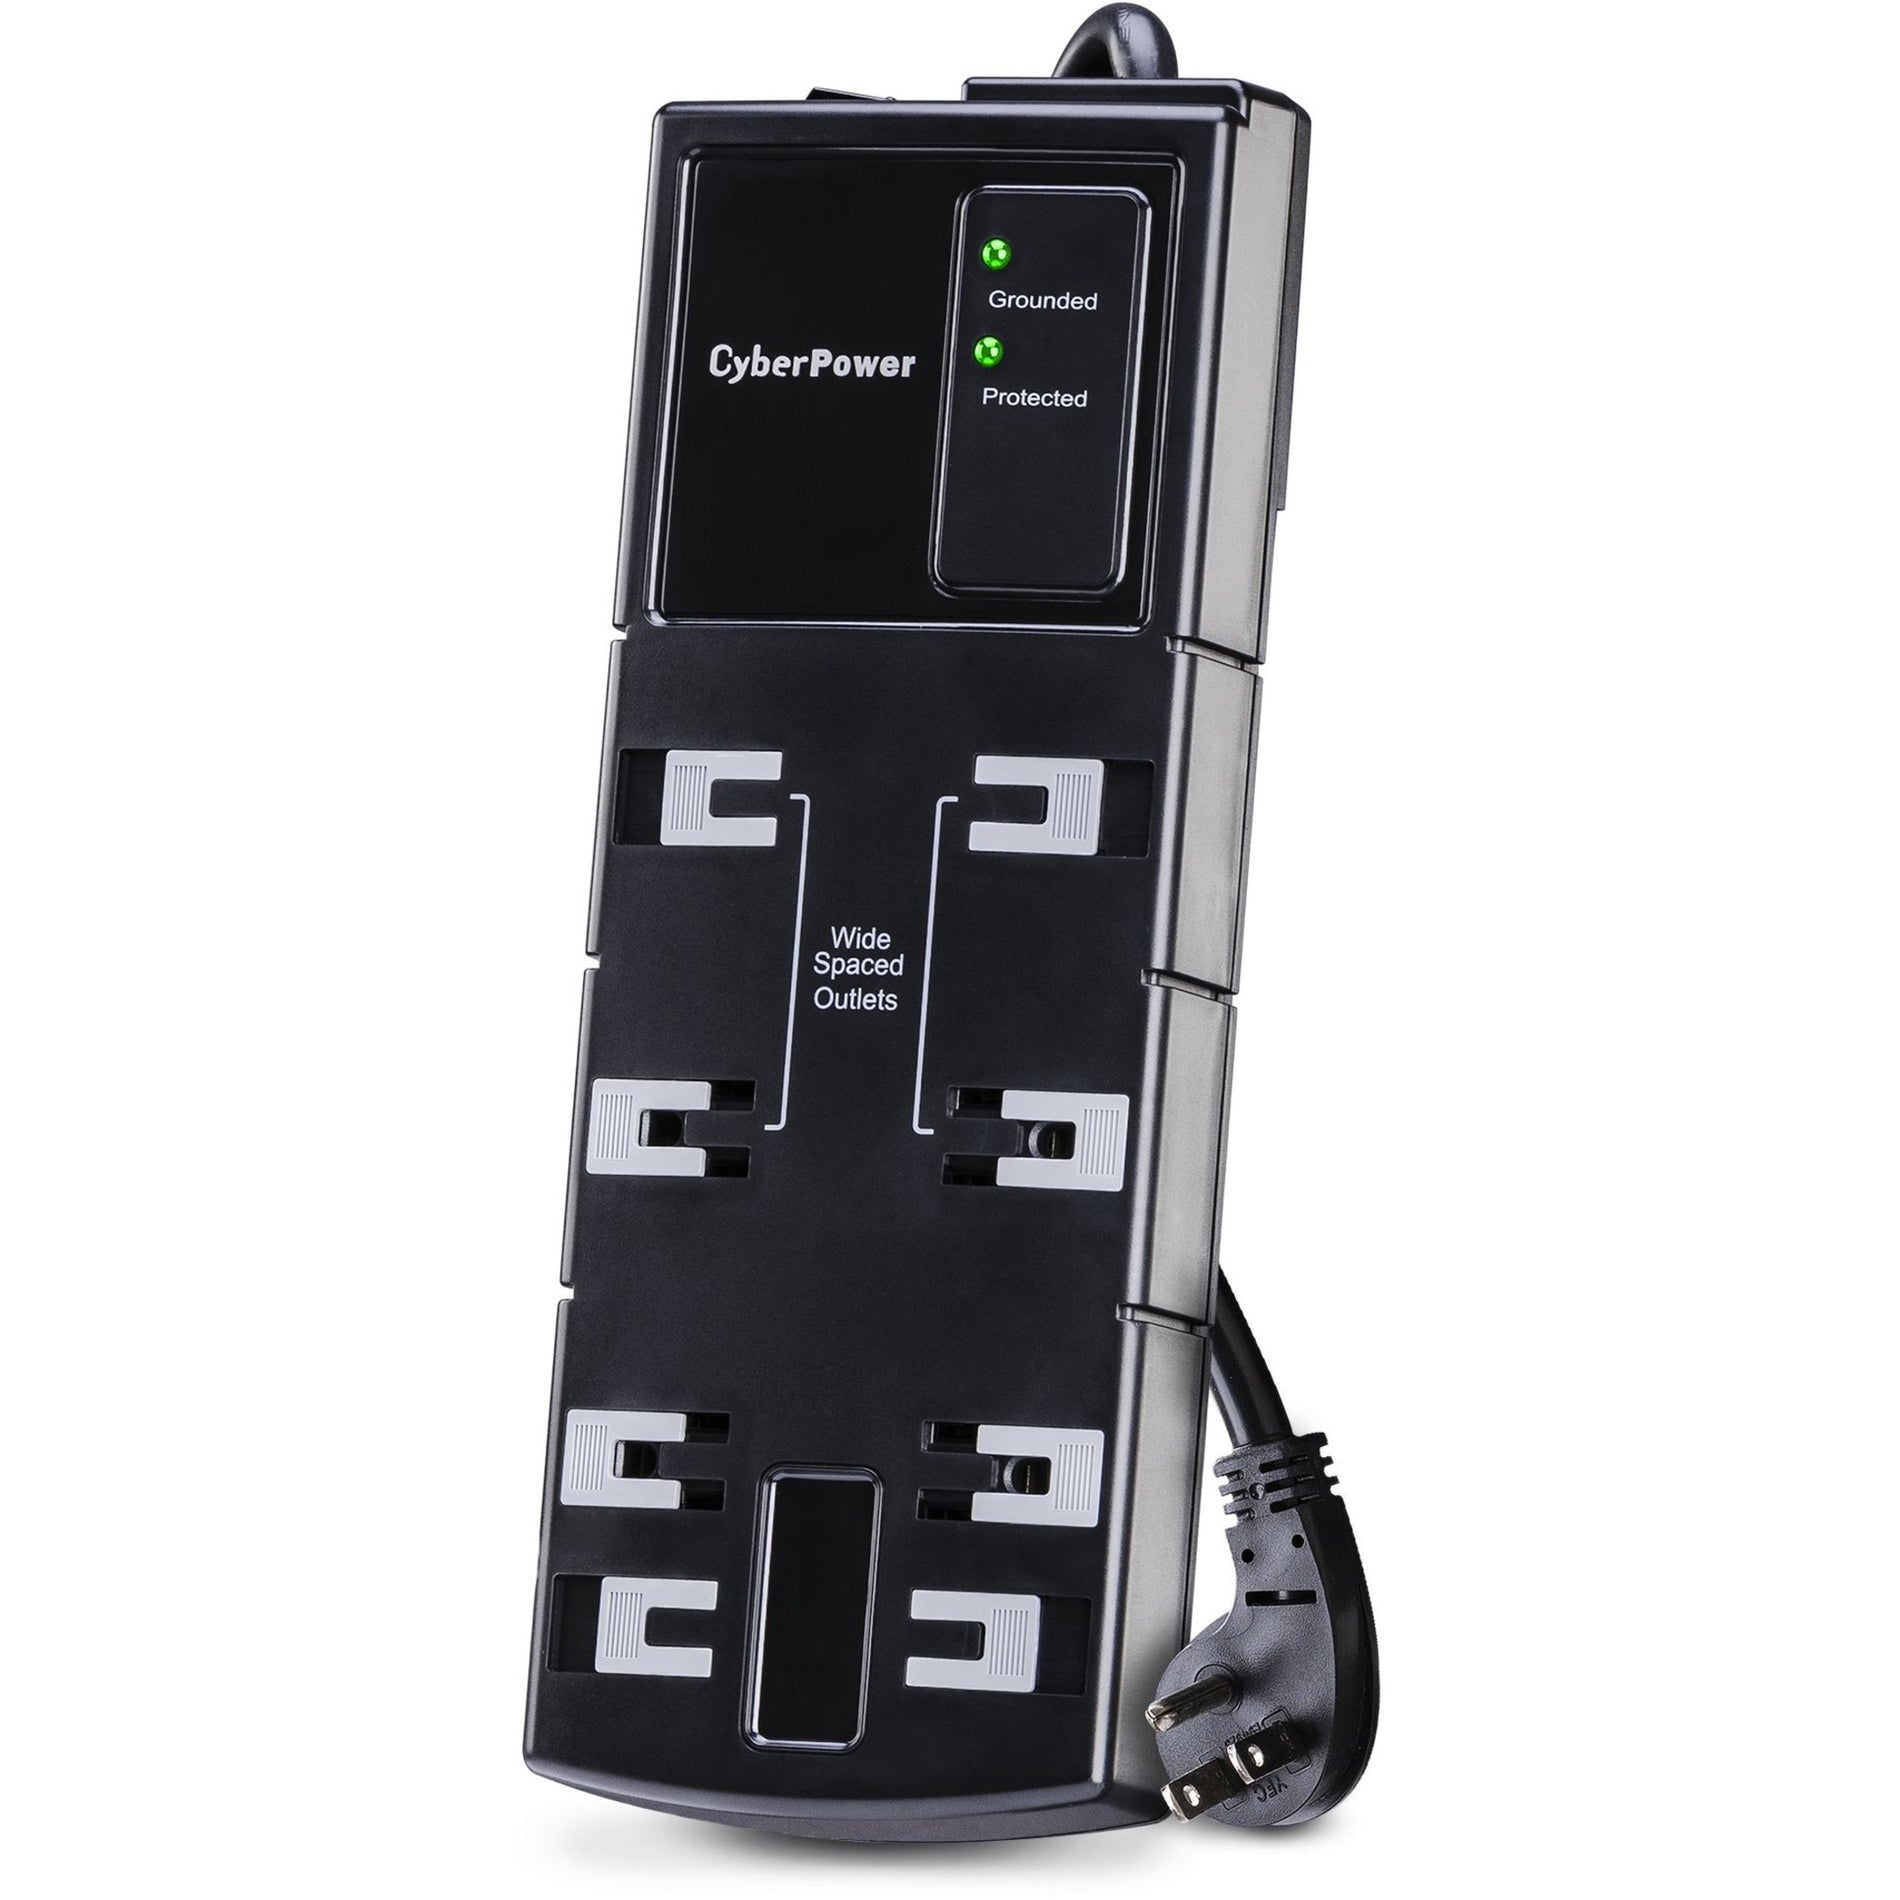 CyberPower CSB808 Essential 8-Outlets Surge Suppressor 8FT Cord, Lifetime Warranty, Automatic Shutdown, EMI/RFI Filters